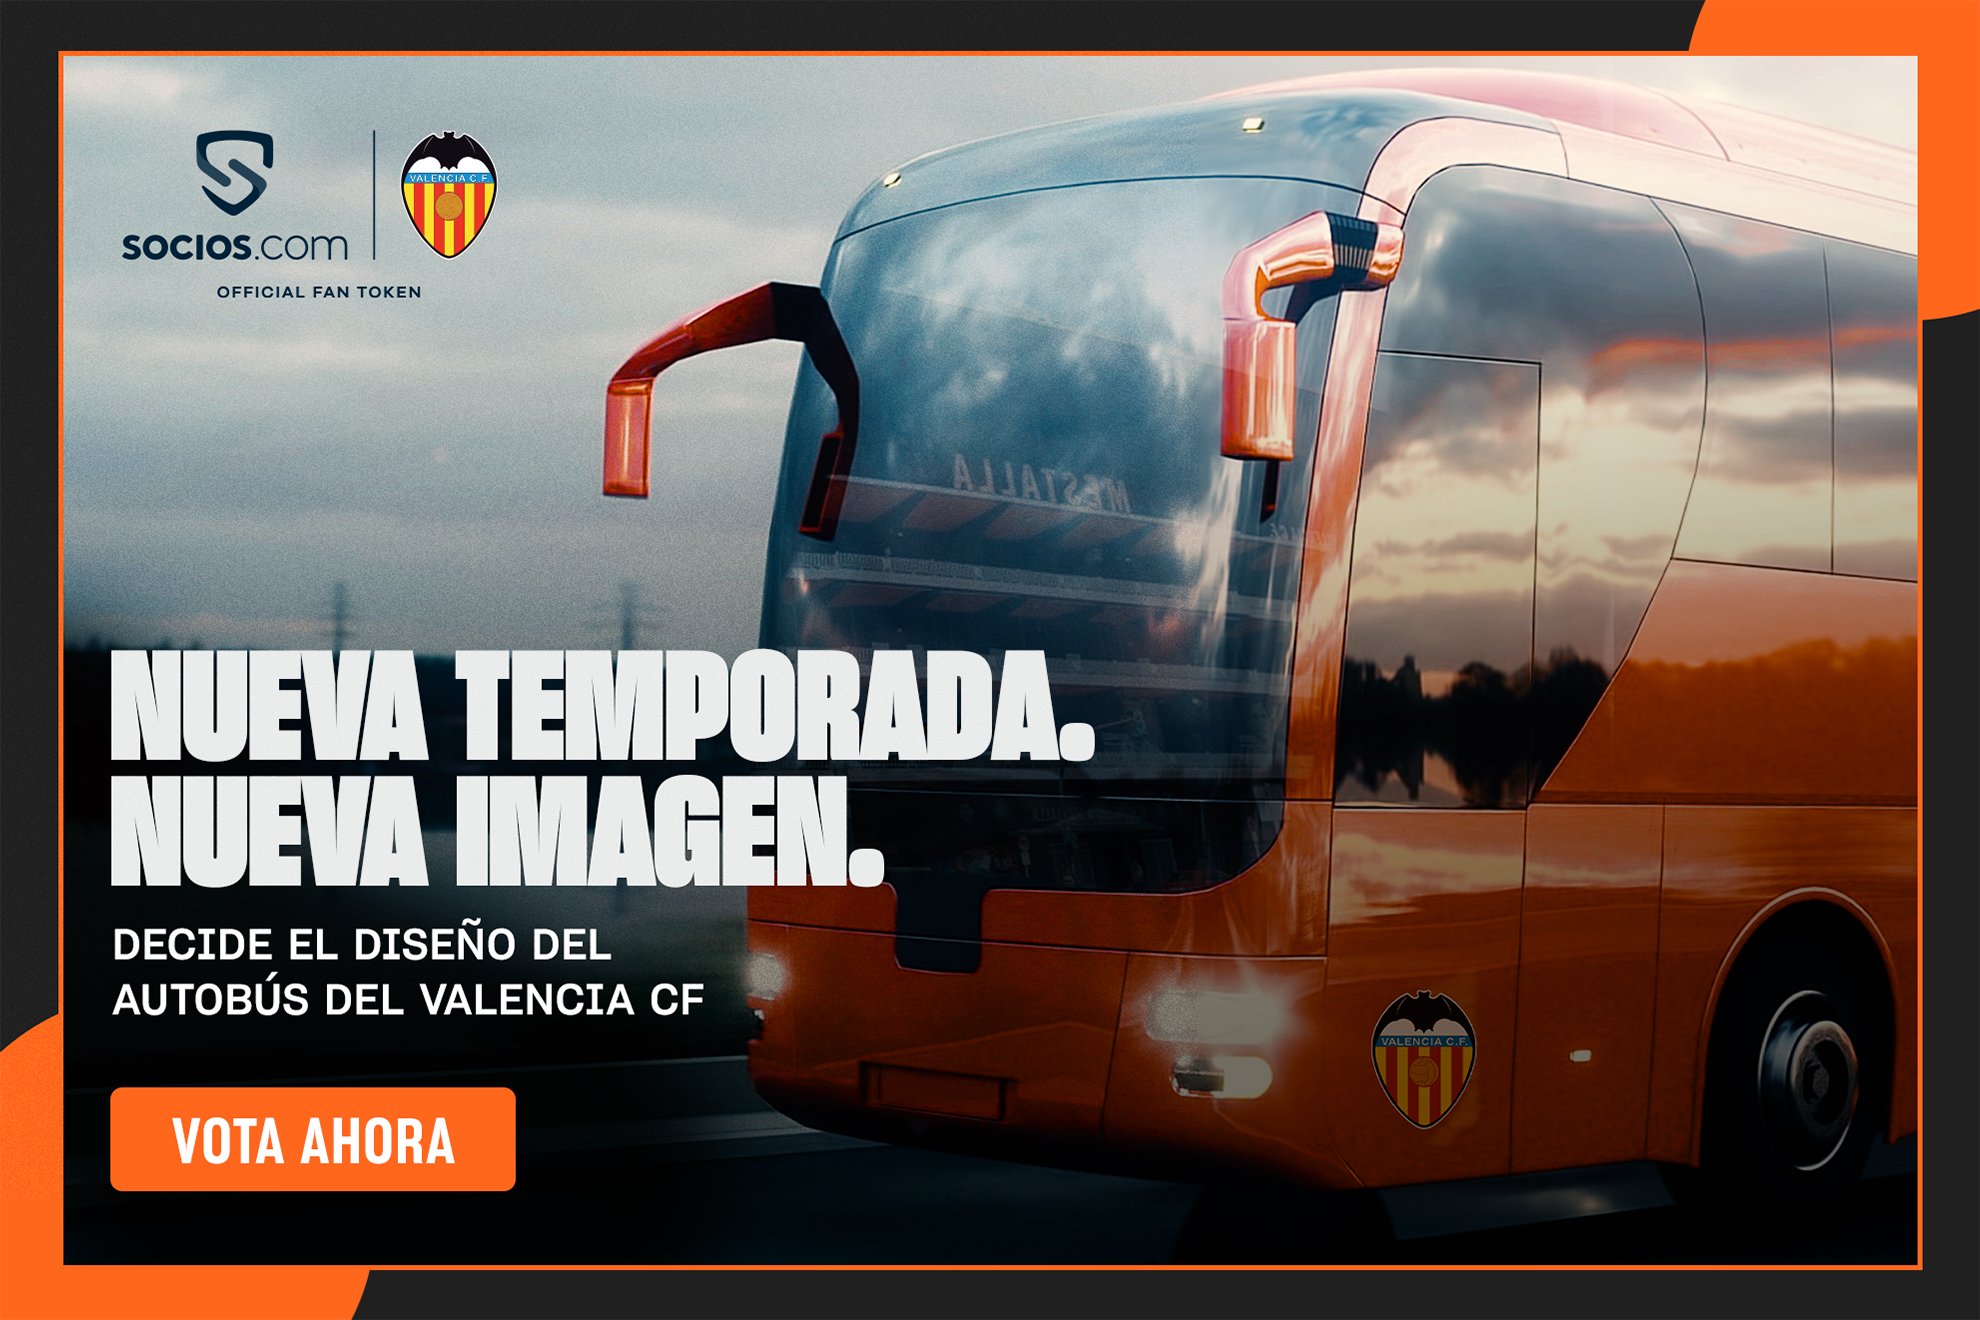 Valencia Fan Token holders can pick the design of the team bus and take part in its decoration